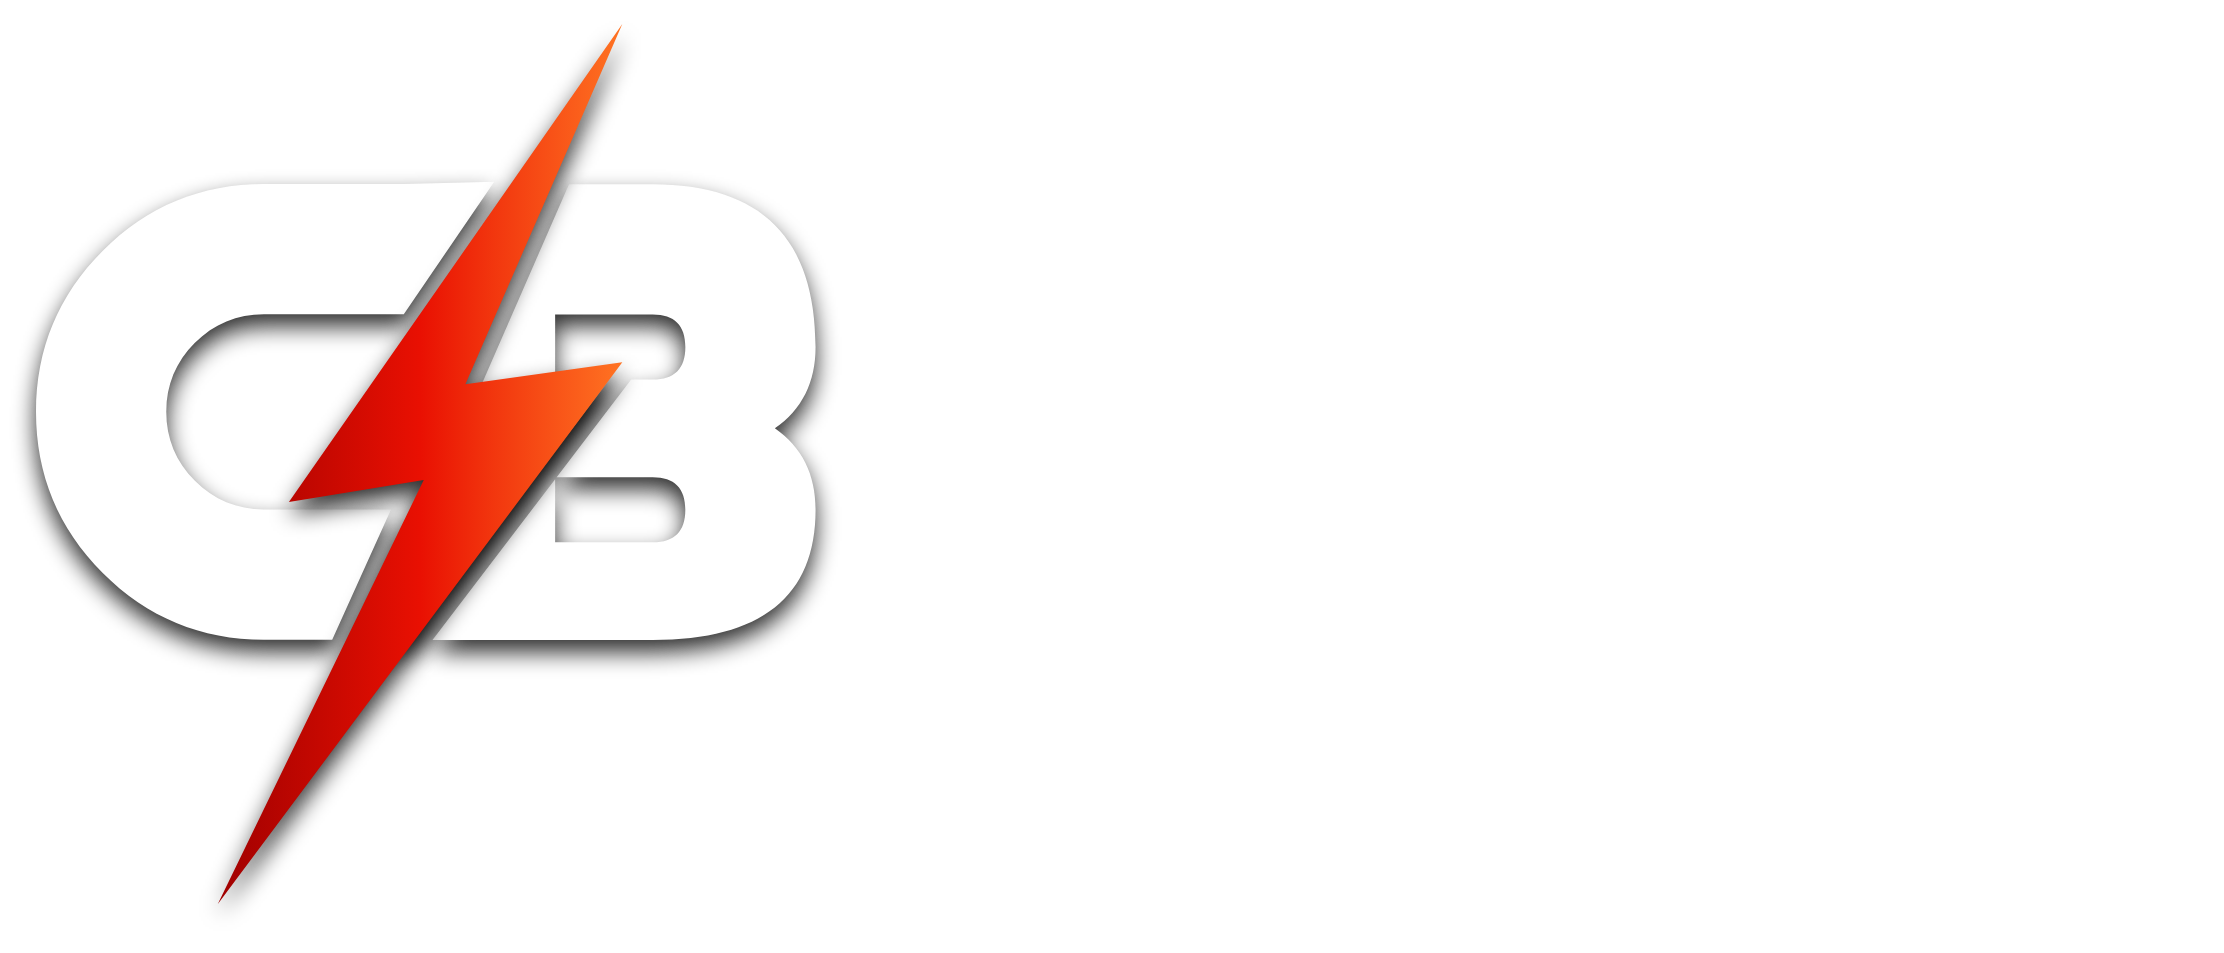 Free download live cricket and Betfair365 app for android and iOS Bet365 Signup at Cricketmazza11